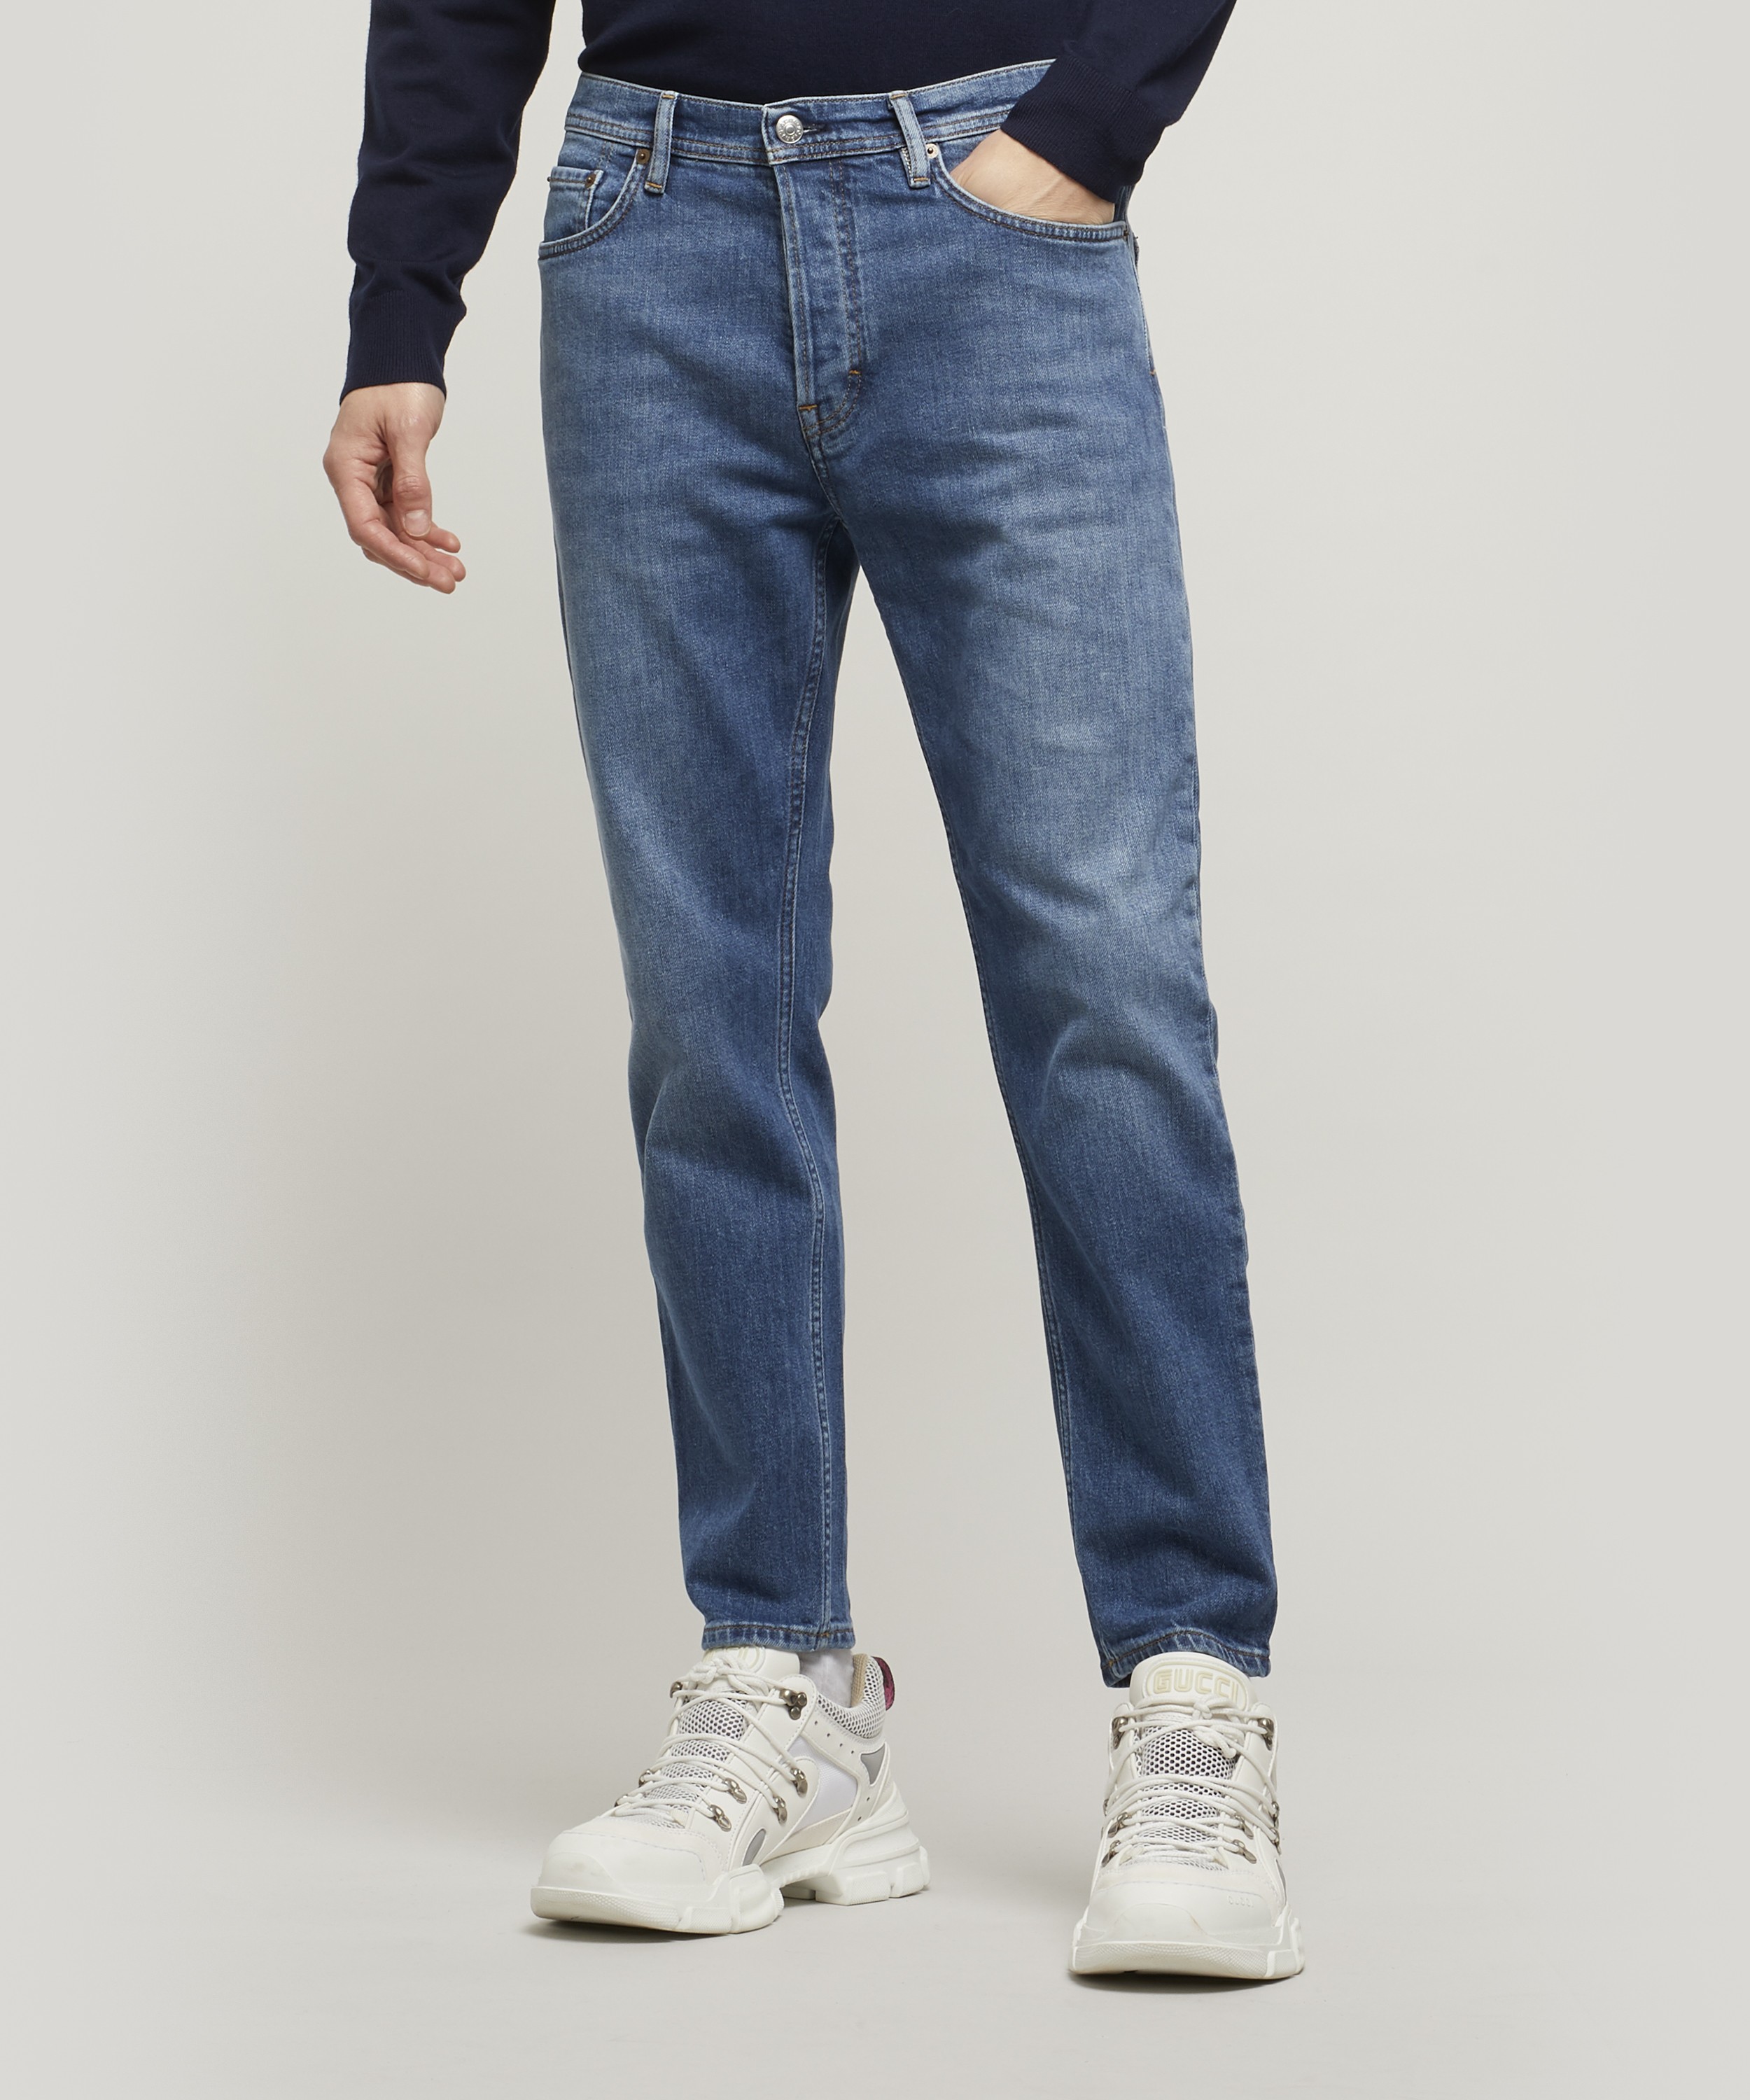 Acne Studios River Mid Blue Straight Fit Jeans | Liberty